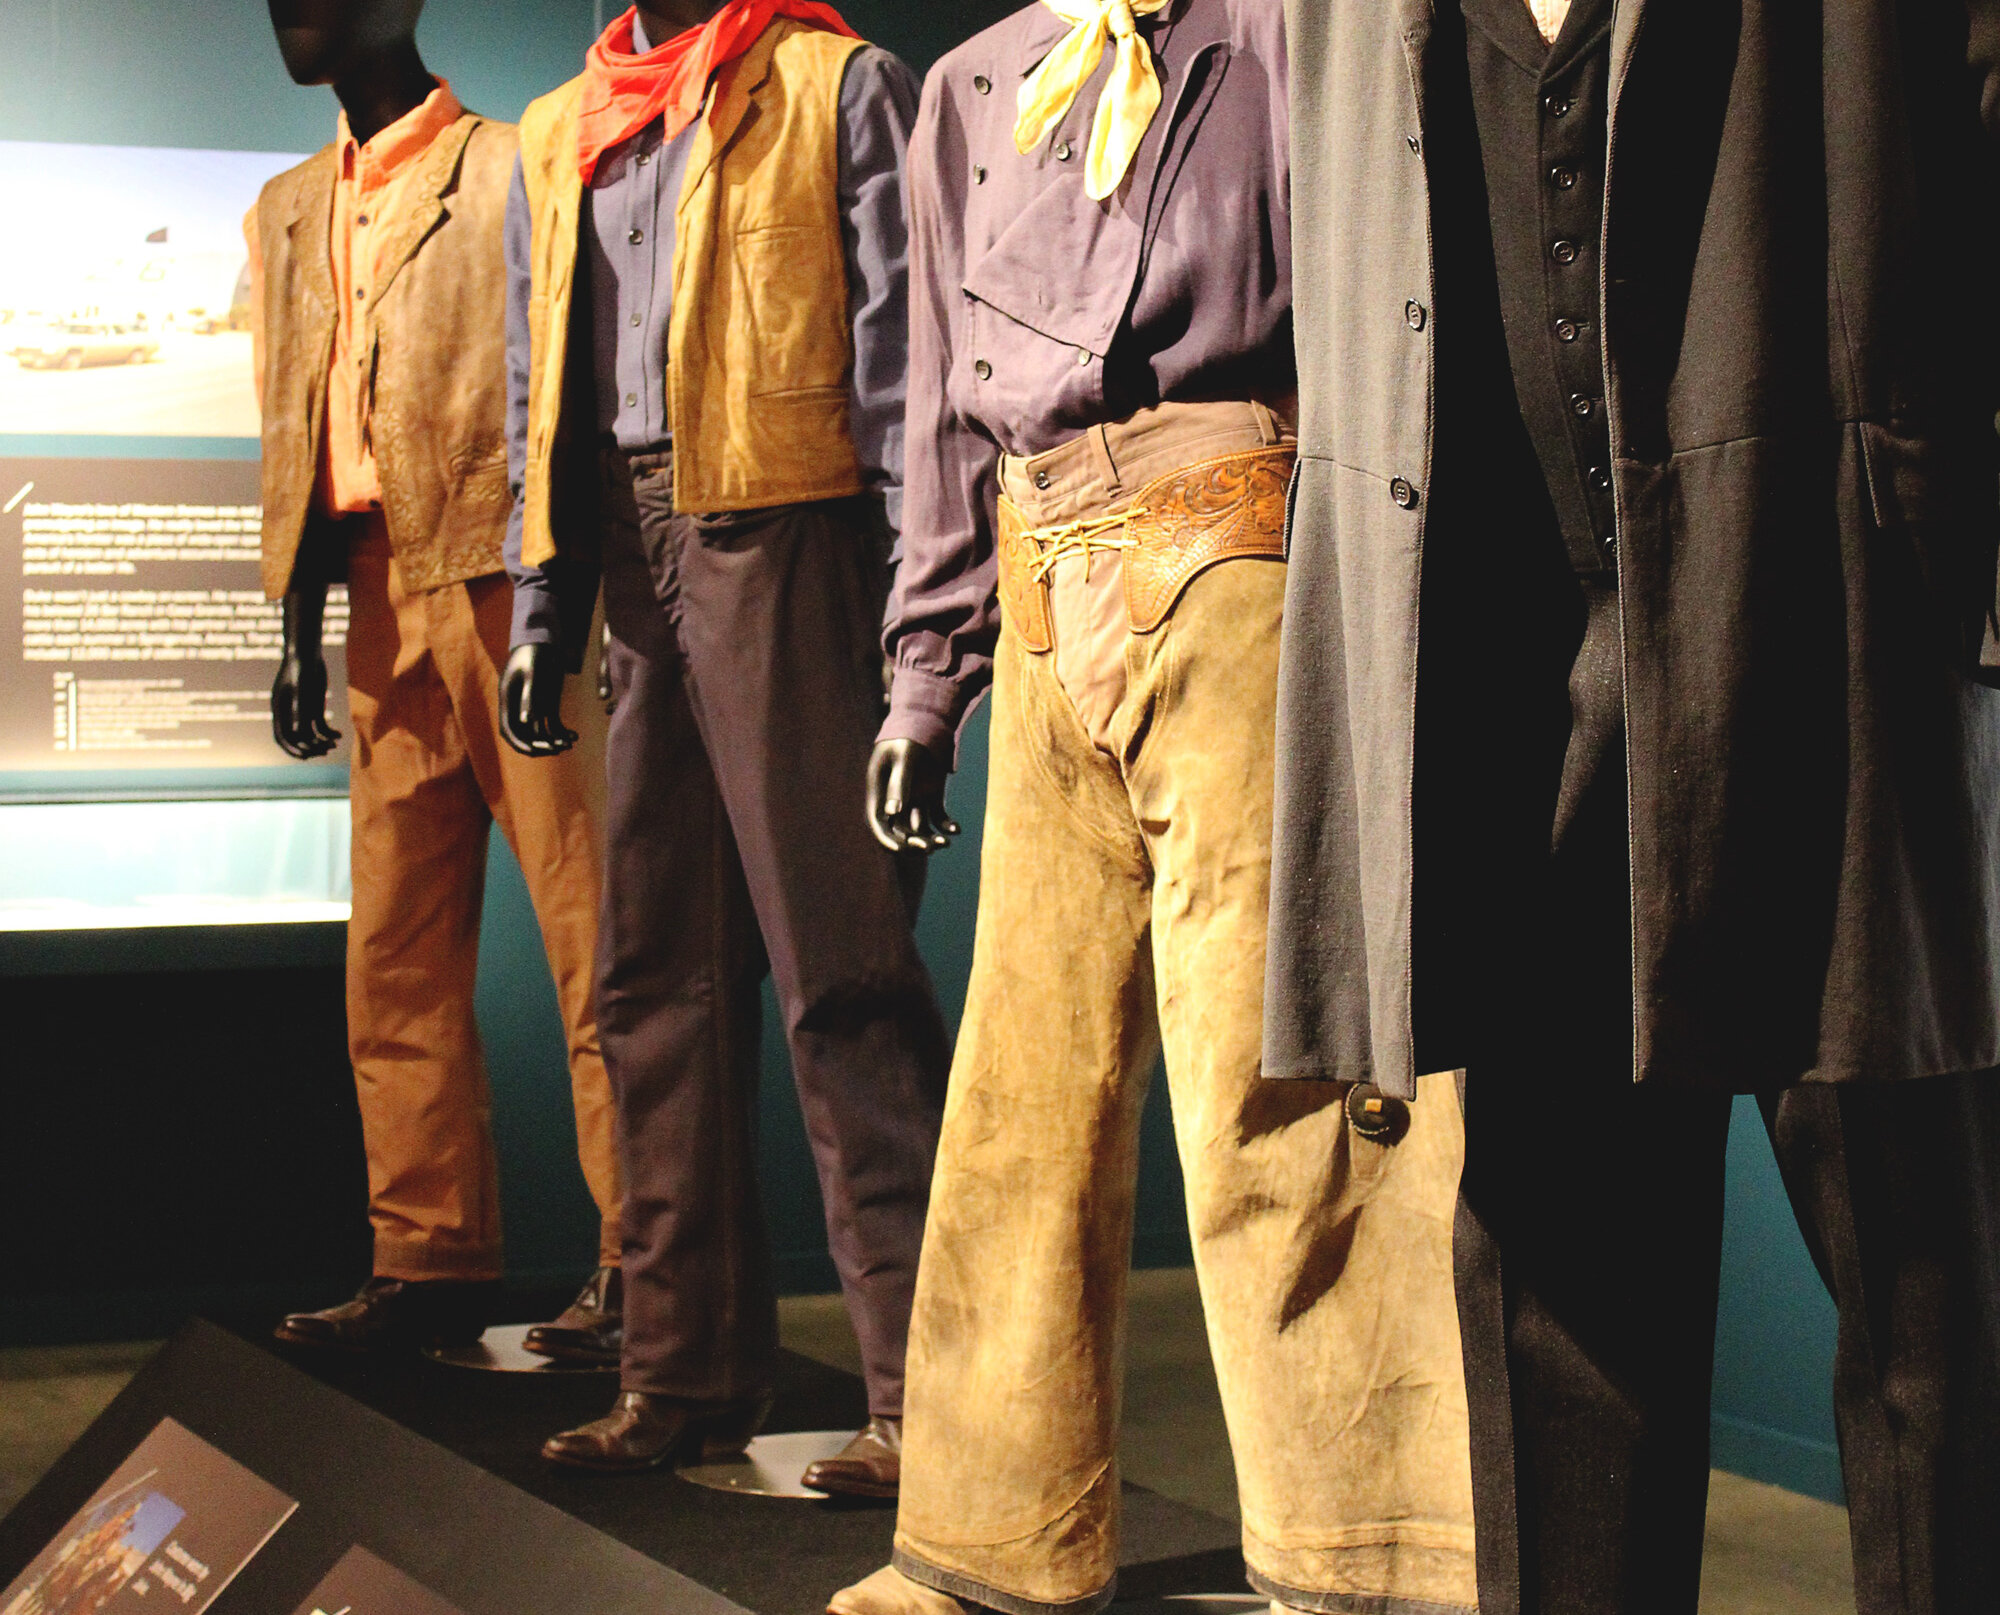 John Wayne’s costumes on display at an exhibit in Nashville, Tennessee. Photo courtesy of JWE